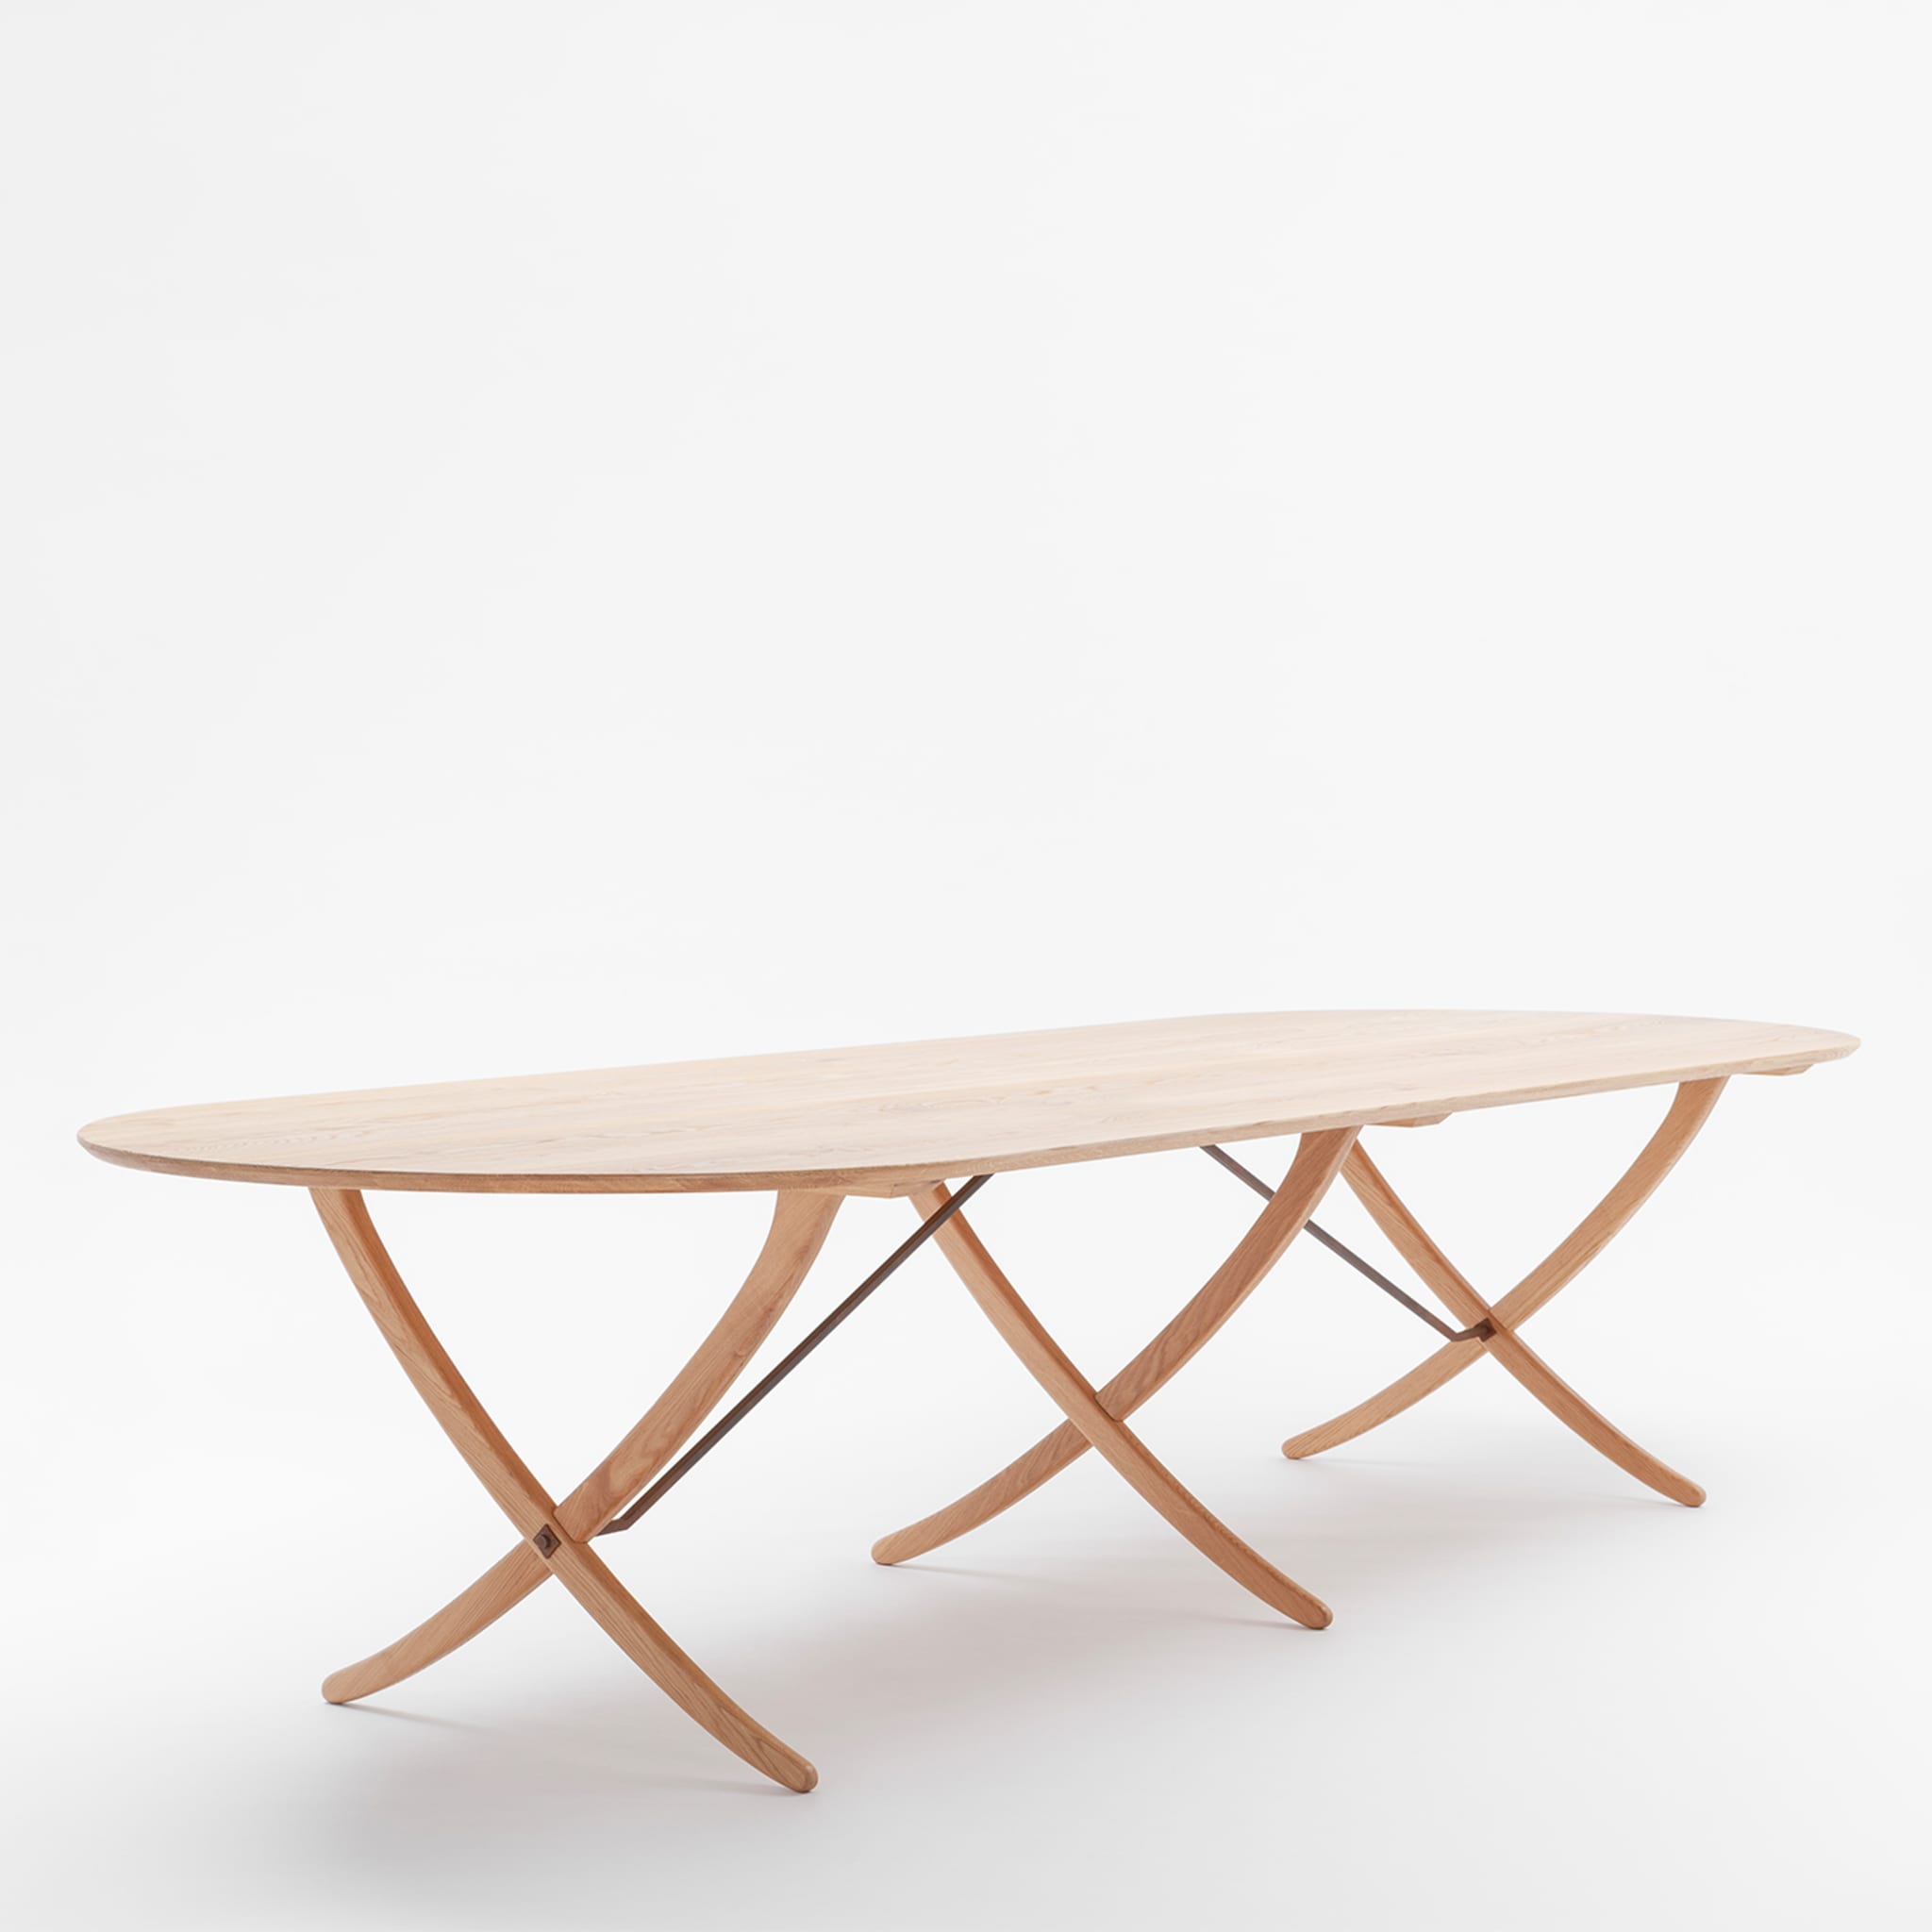 Arch Large Durmast Dining Table - Alternative view 4